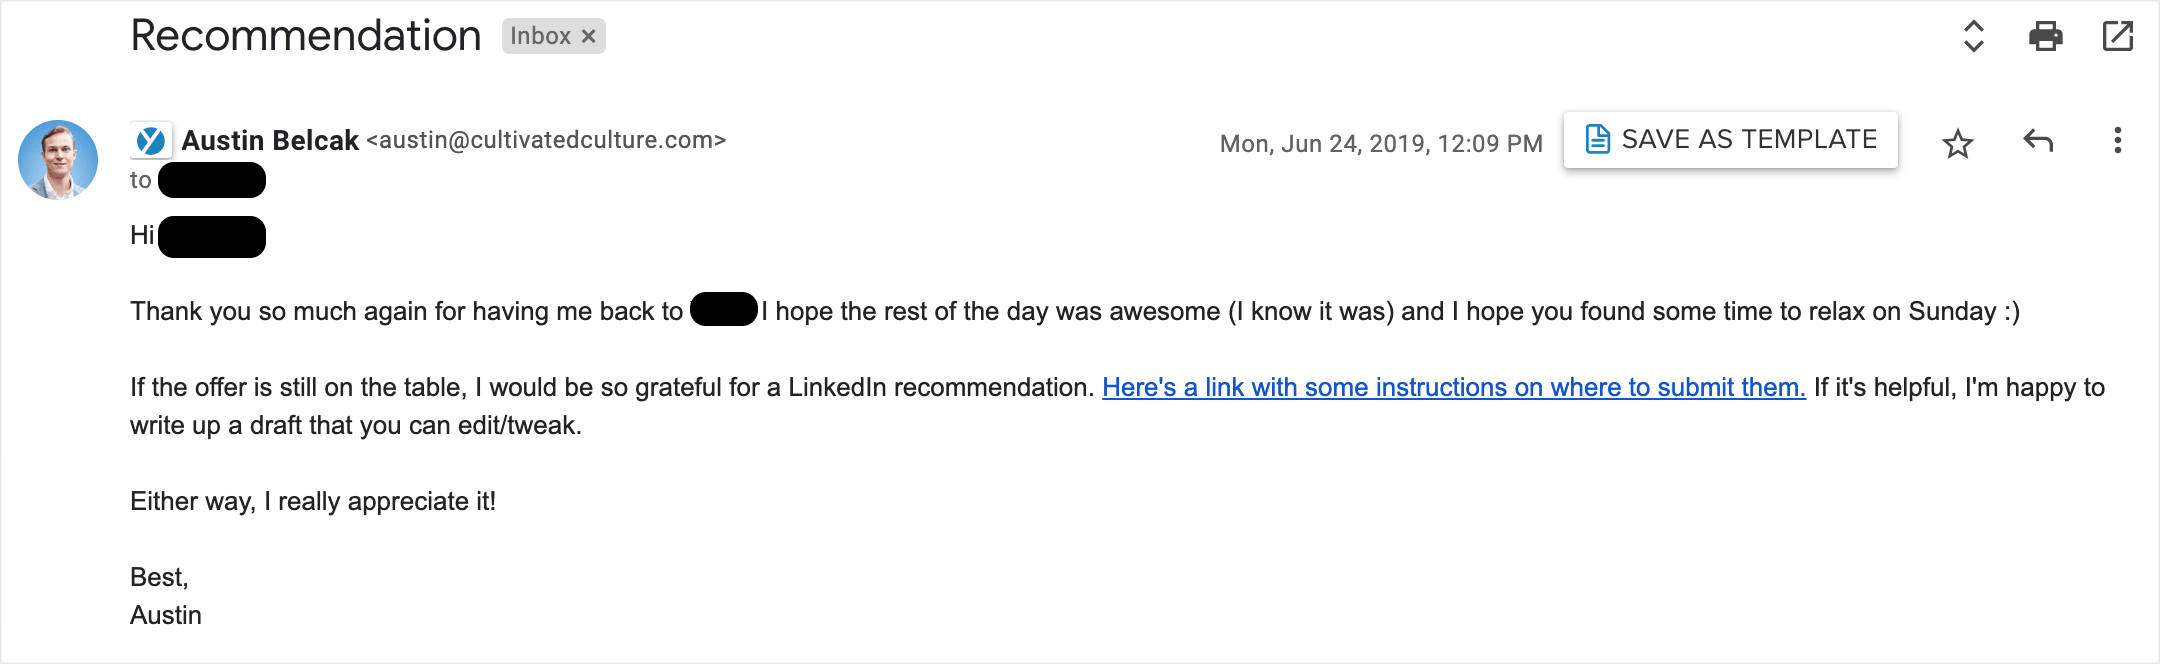 Example of Request For LinkedIn Recommendation